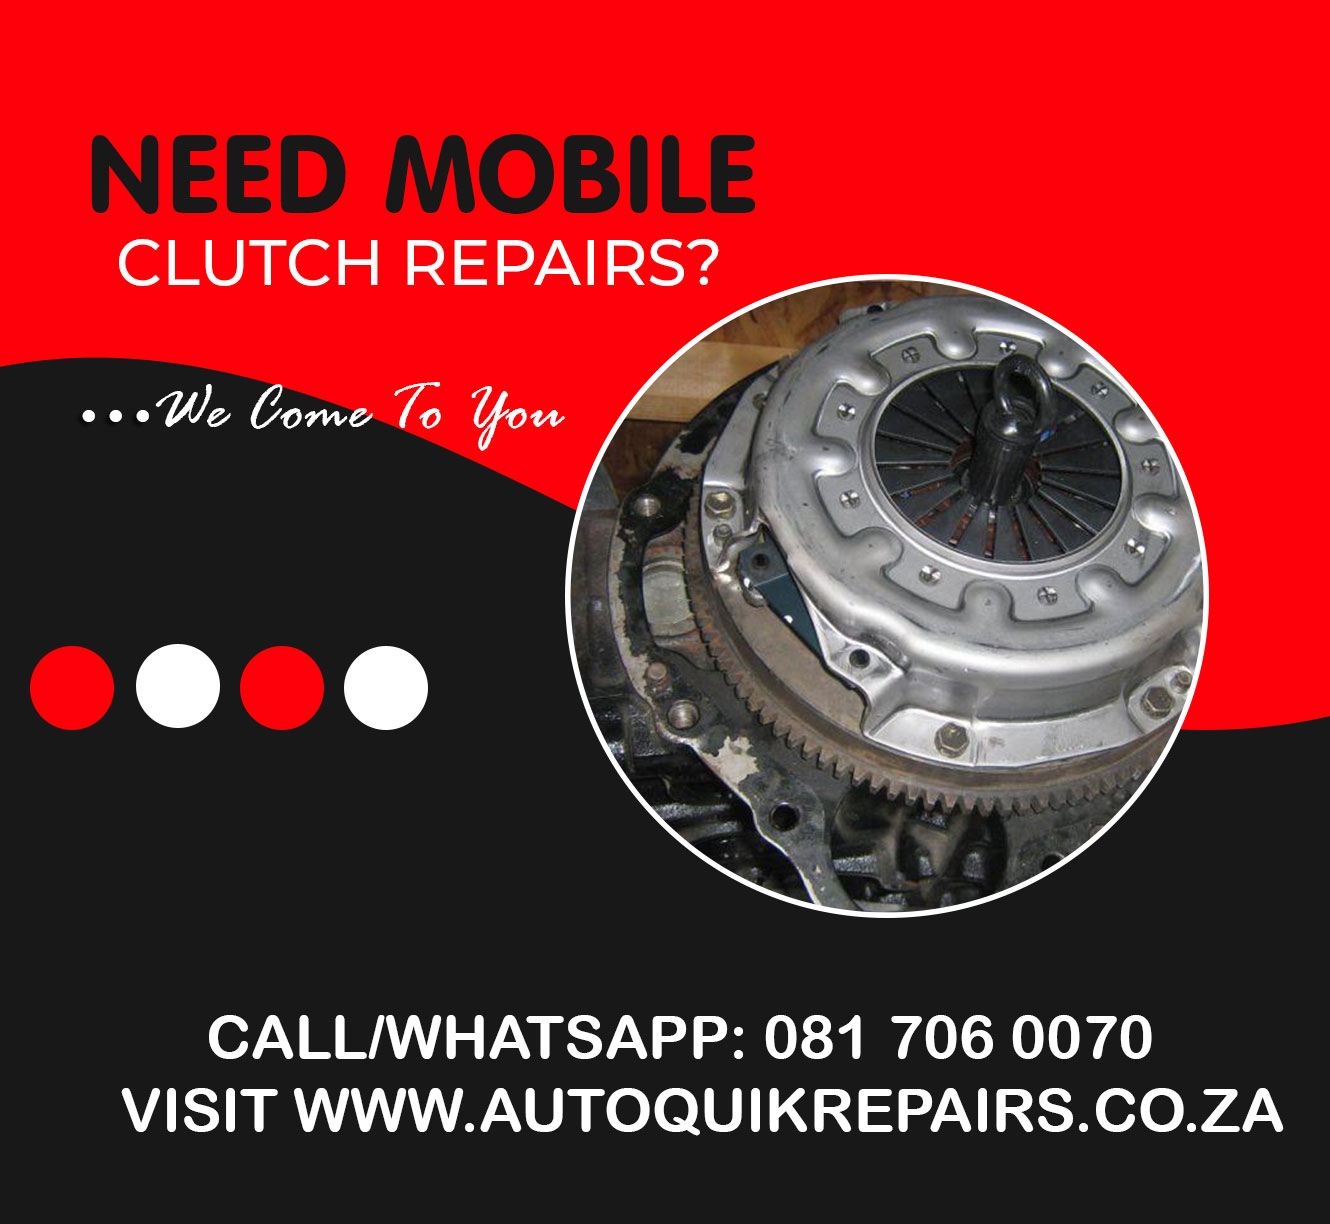 We offer the best clutch repairs in Johannesburg, for more information call us at 081 706 0070 or visit www.autoquikrepairs.co.za